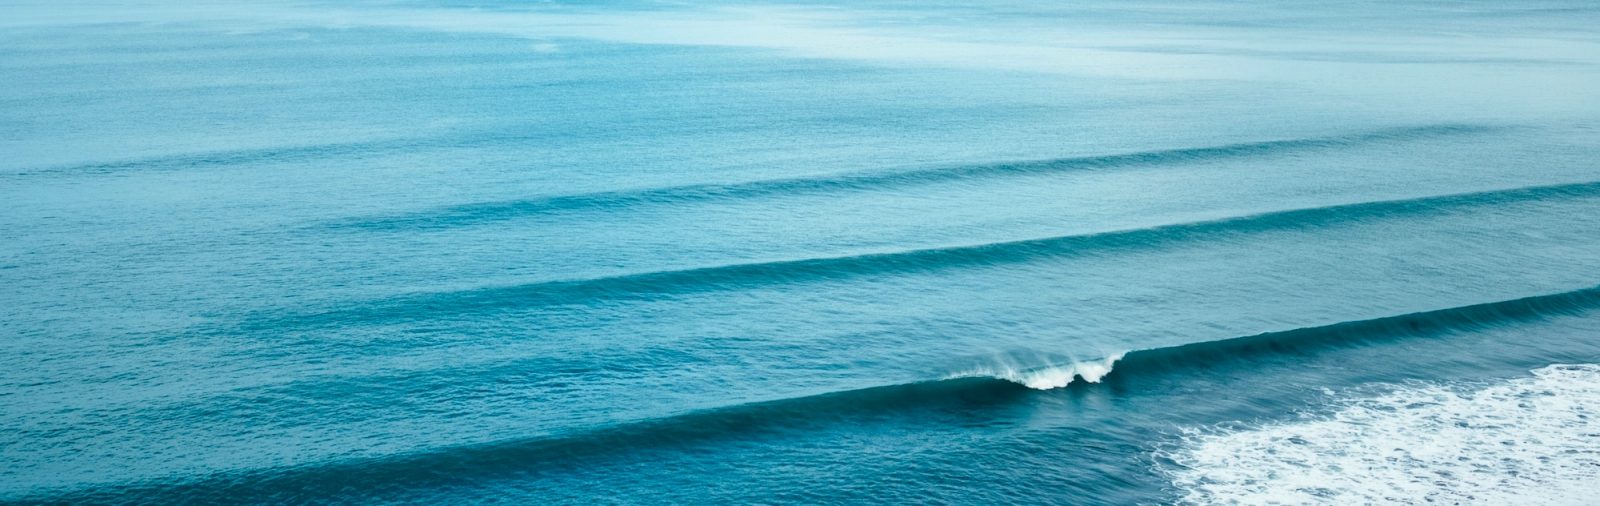 Crescent Head, NSW, Australia. 12 of the Best Longboarding Waves For Surfers